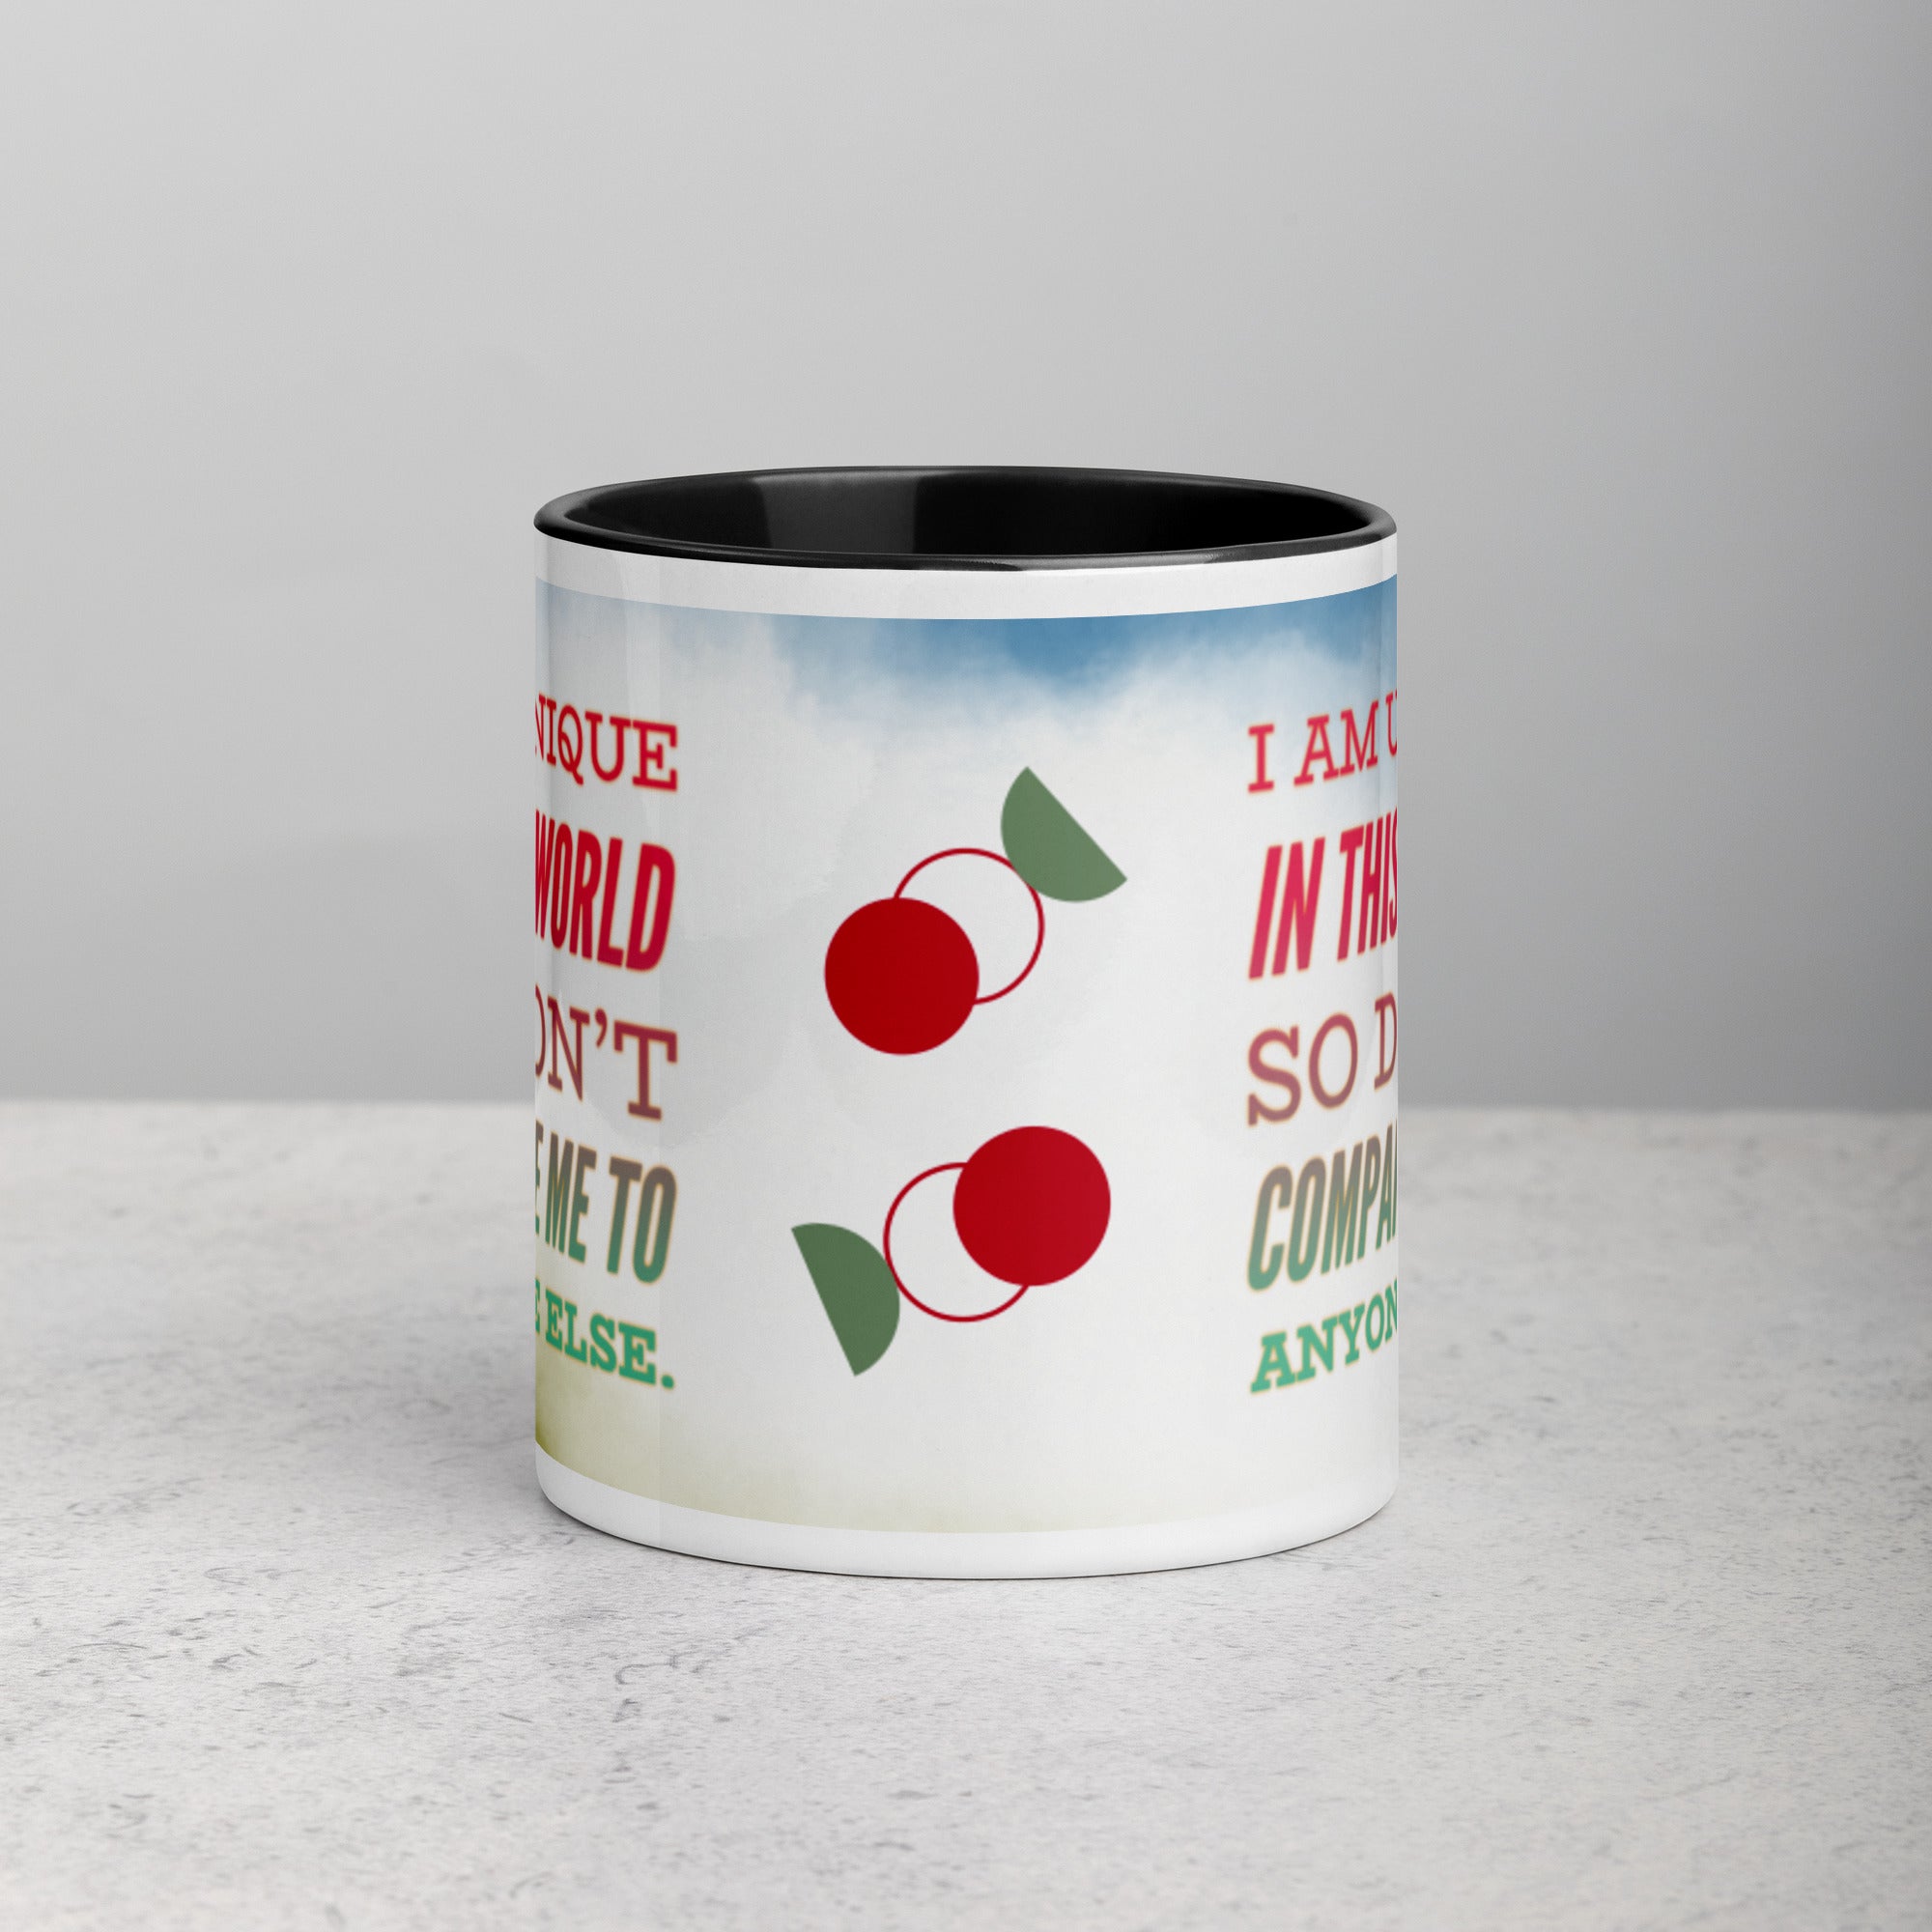 GloWell Designs - Mug with Color Inside - Affirmation Quote - I Am Unique - GloWell Designs